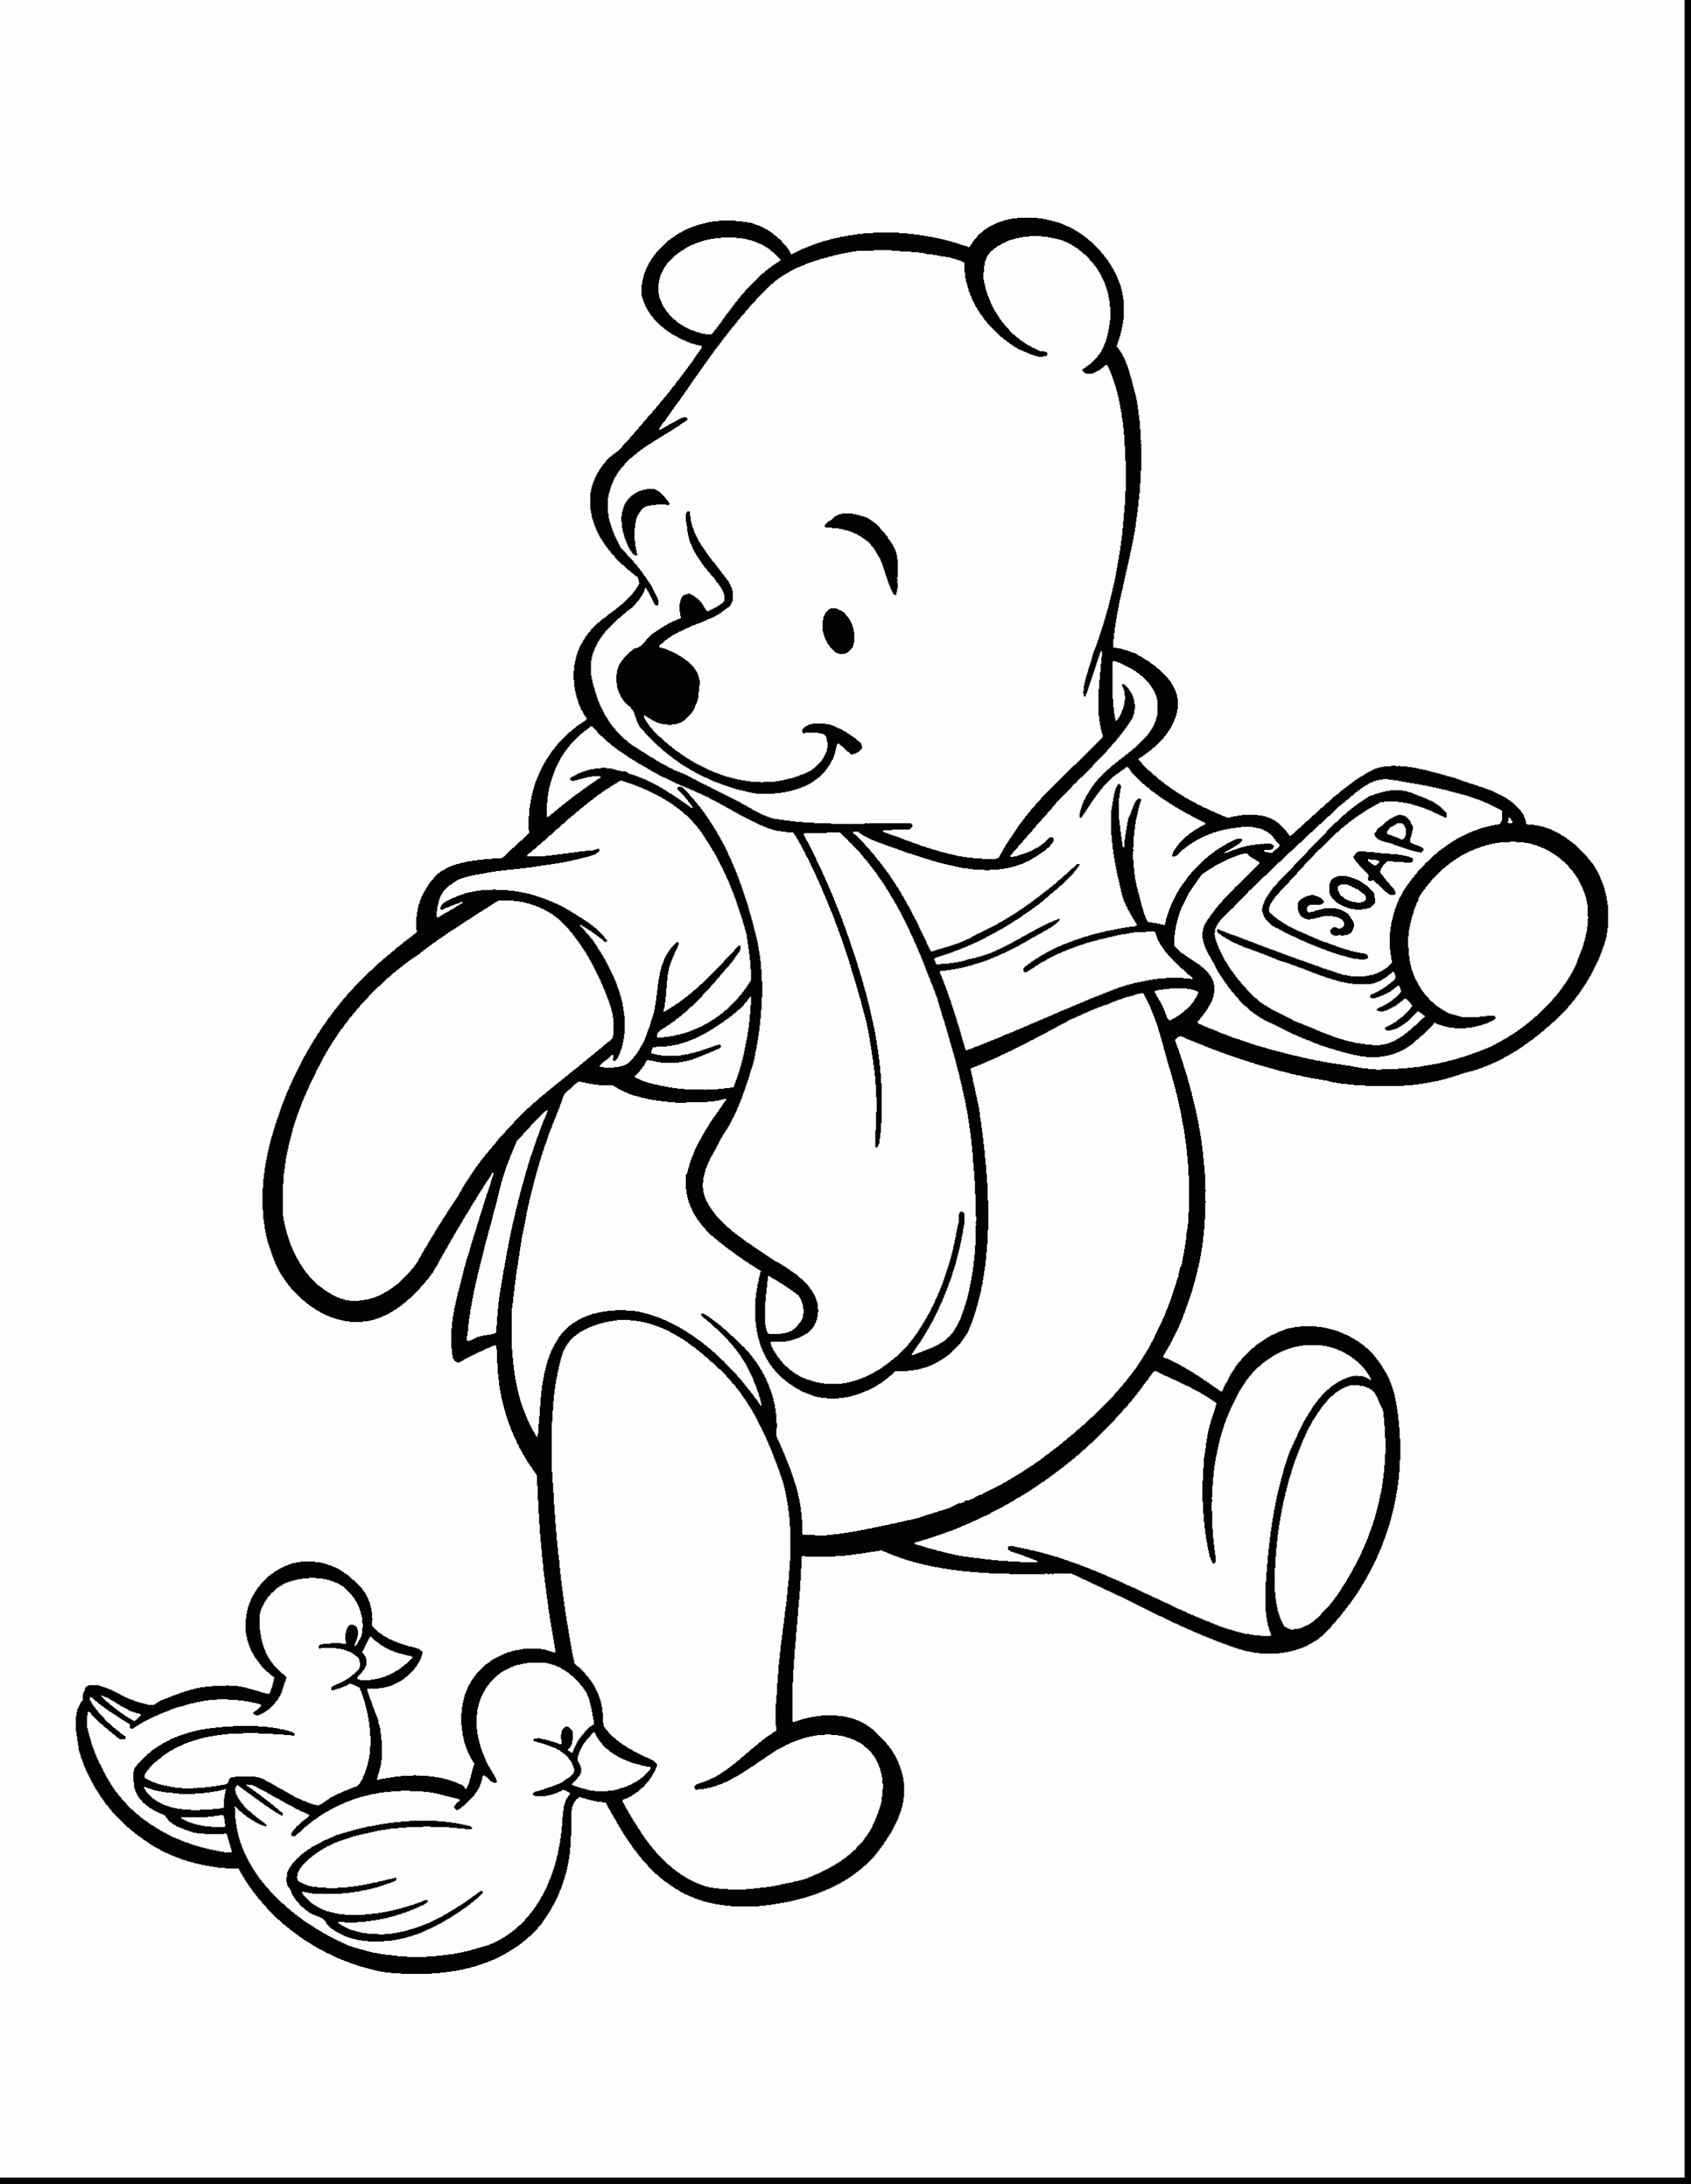 Make Your Own Name Coloring Pages At Getdrawings Free Download 